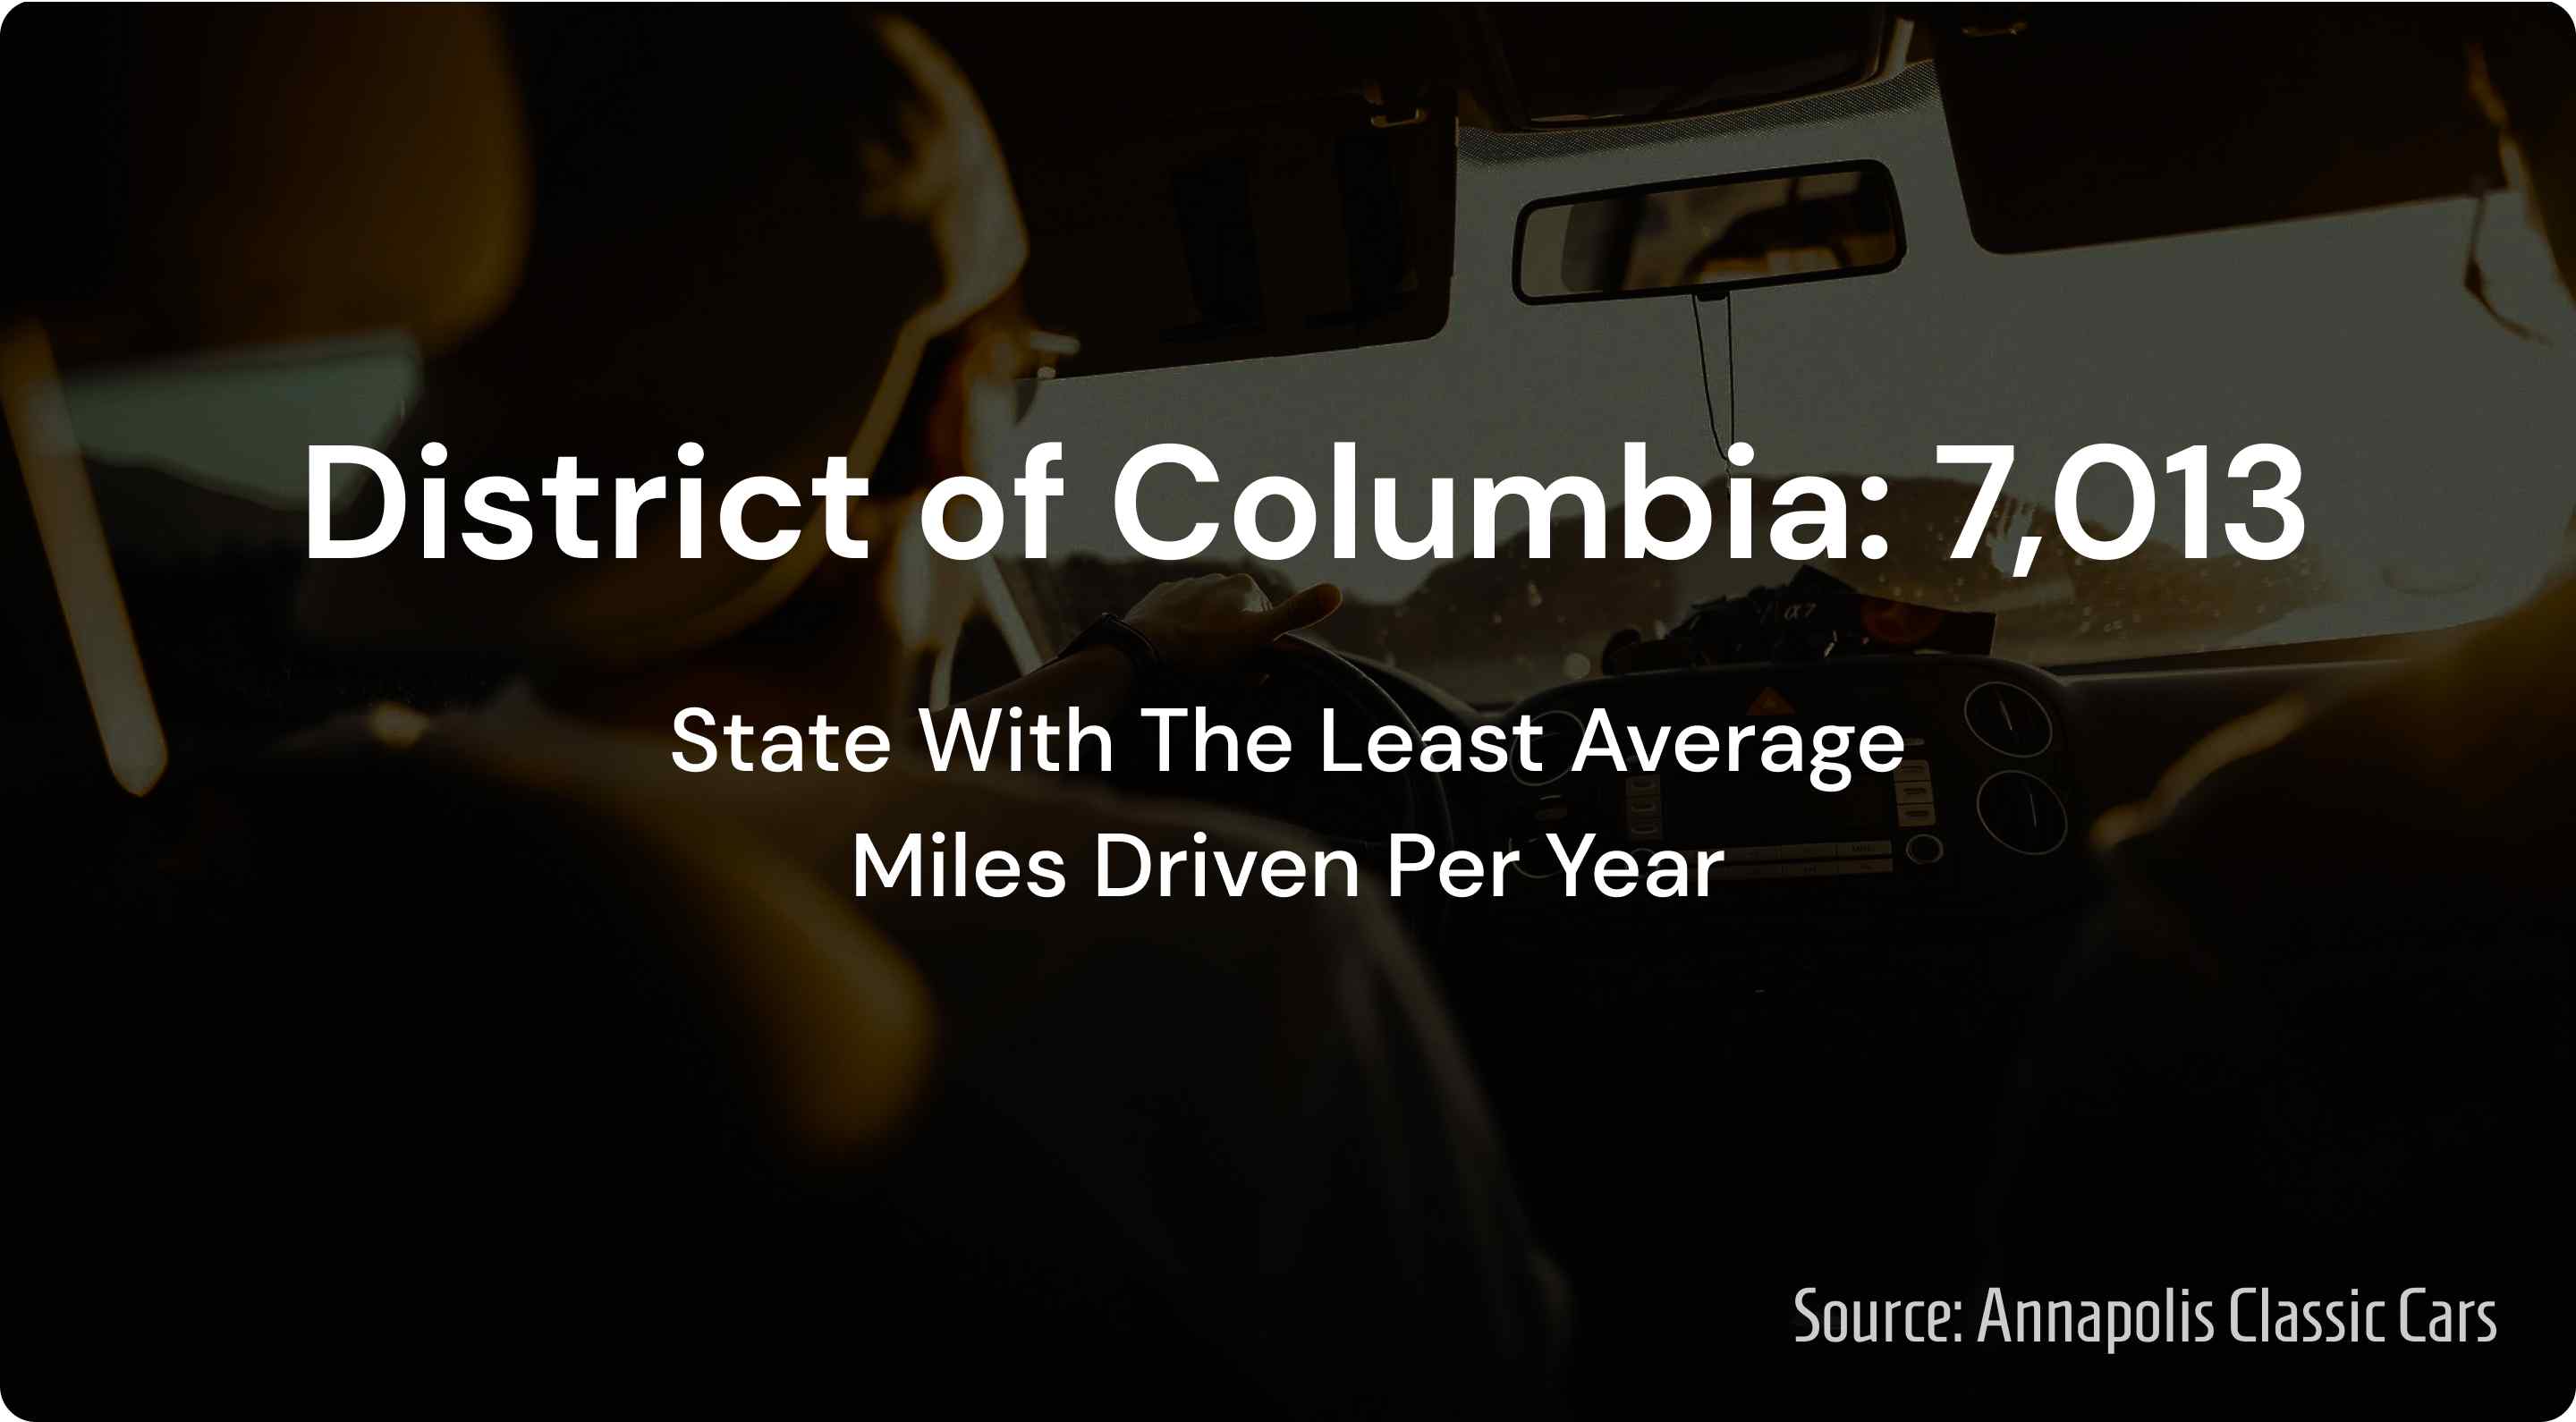 state with the least average miles driven per year